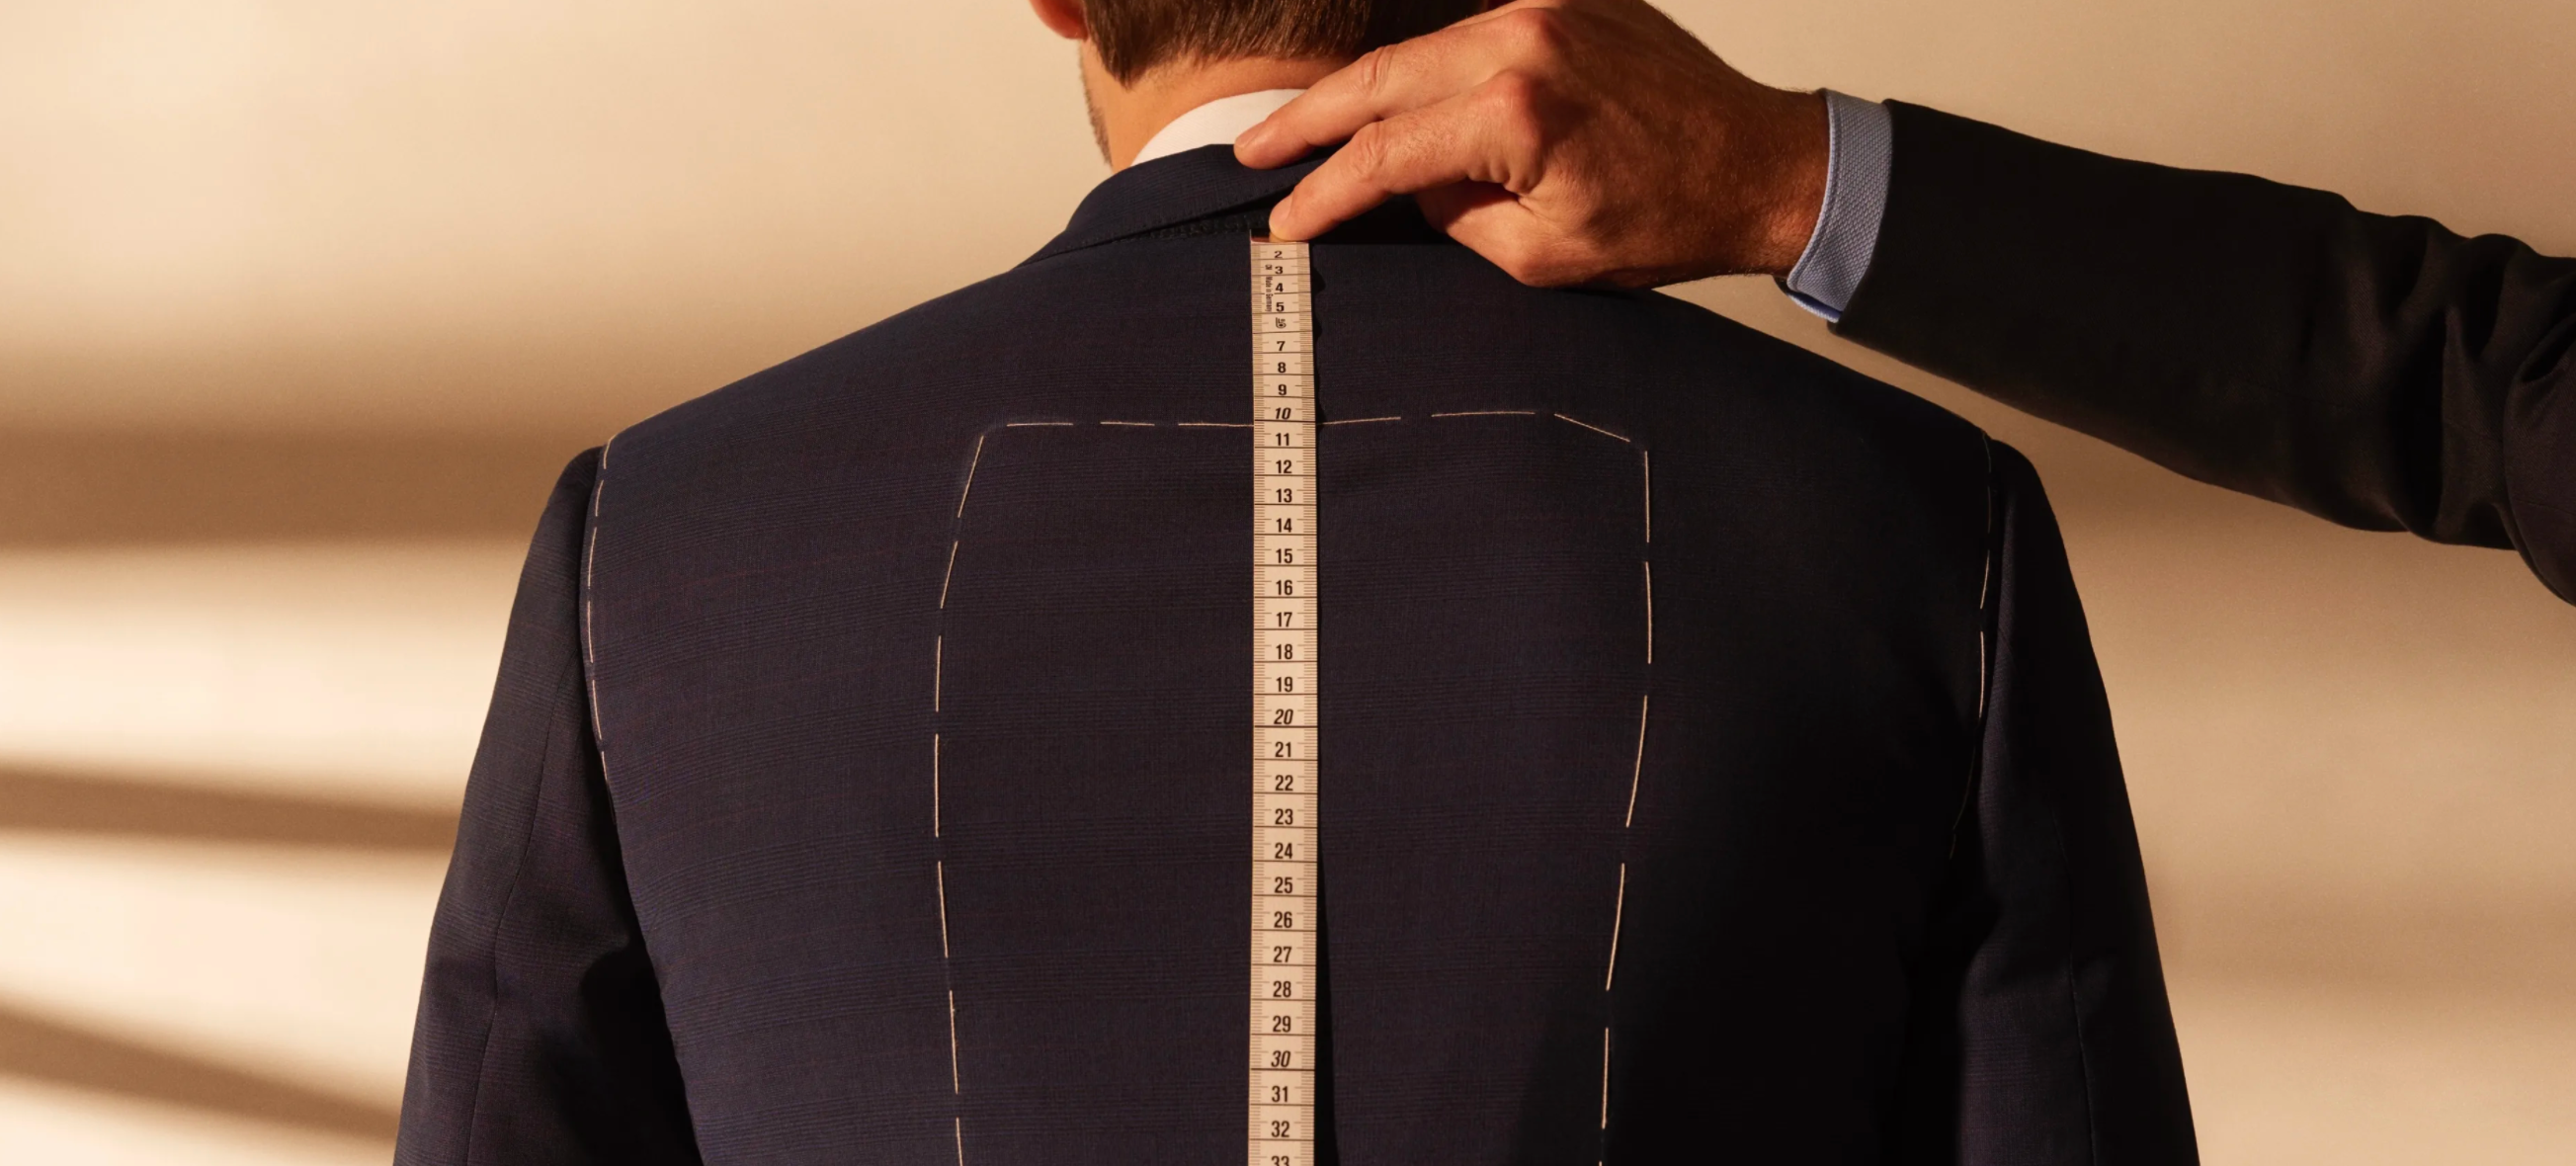 Bespoke Tailoring and Made-to-Measure the differences — De Oost Bespoke  Tailoring - Bespoke Tailoring Guide: Custom Suits, Wedding Suits, Fabrics,  Tailoring & Maintenance Tips